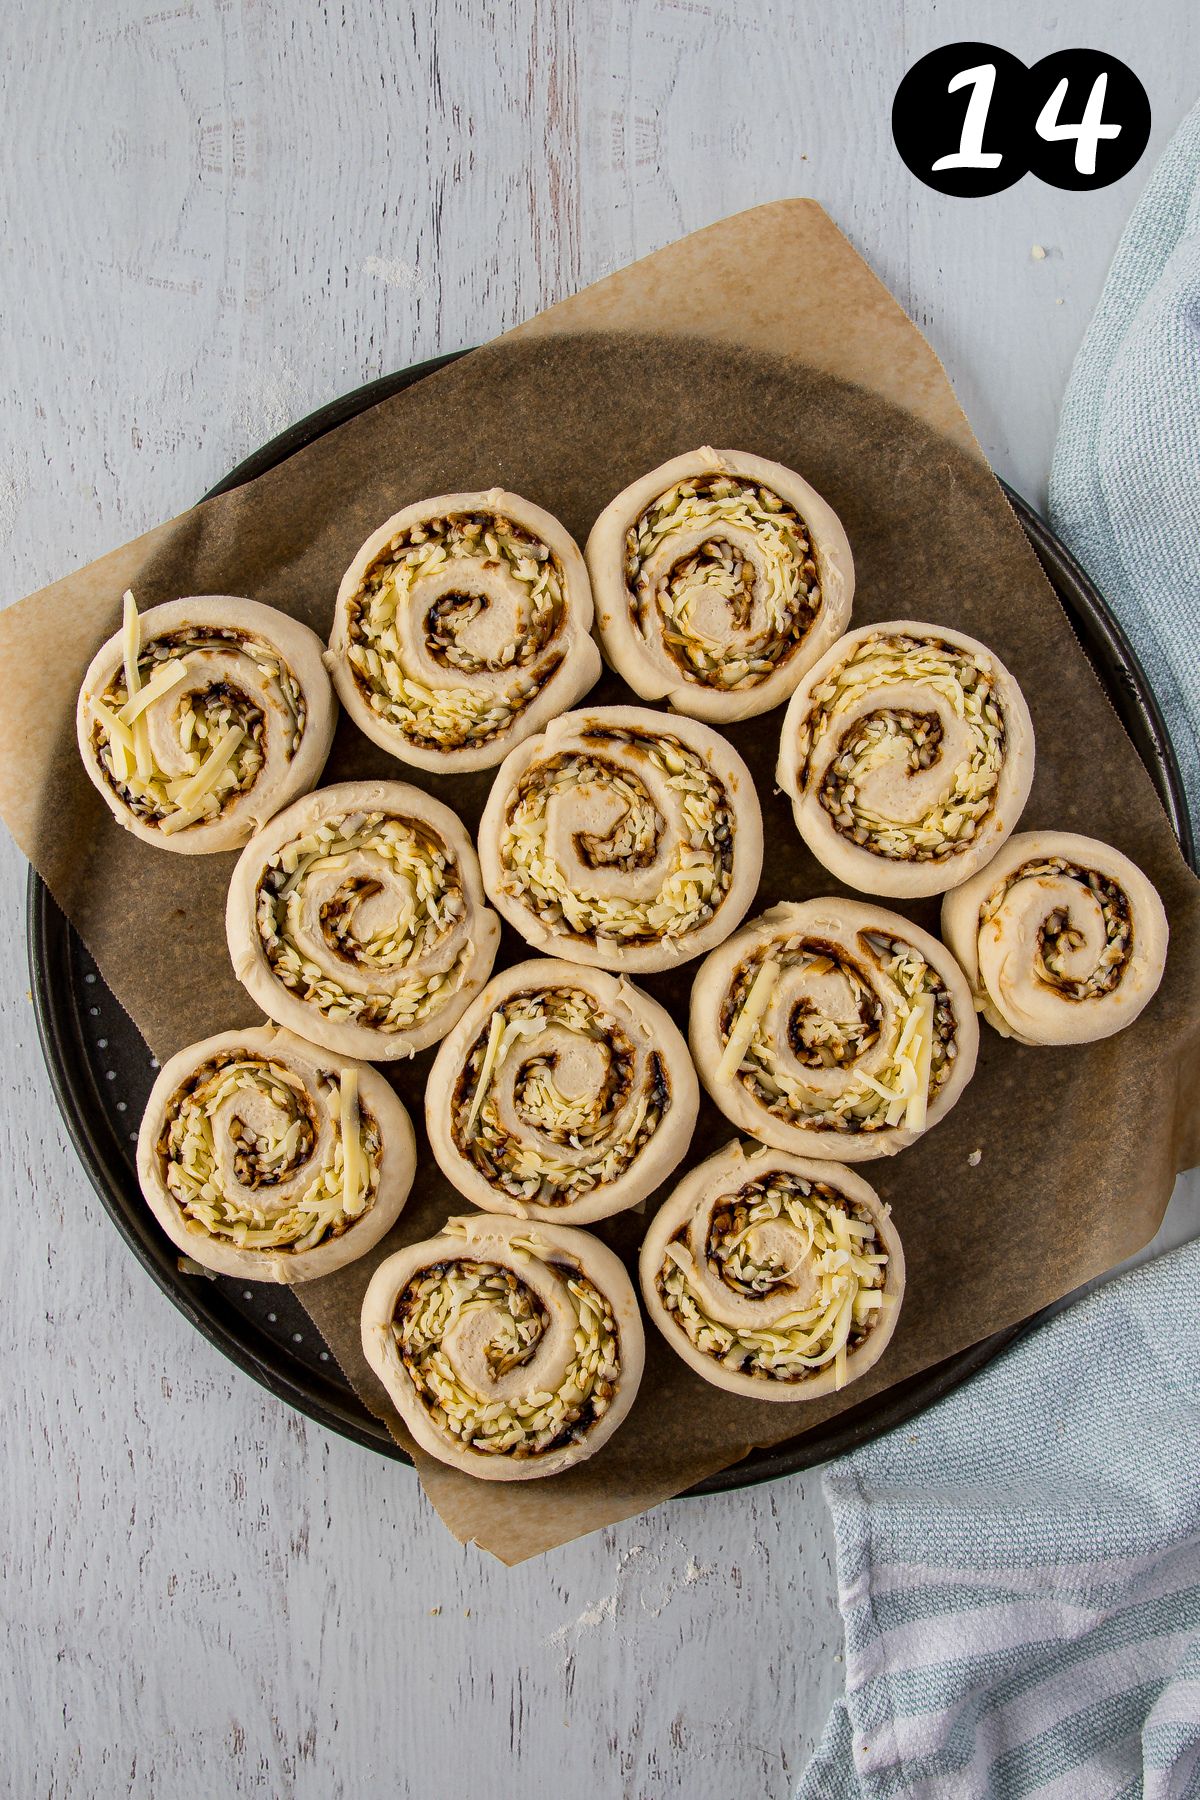 cheese and vegemite scrolls on a baking tray